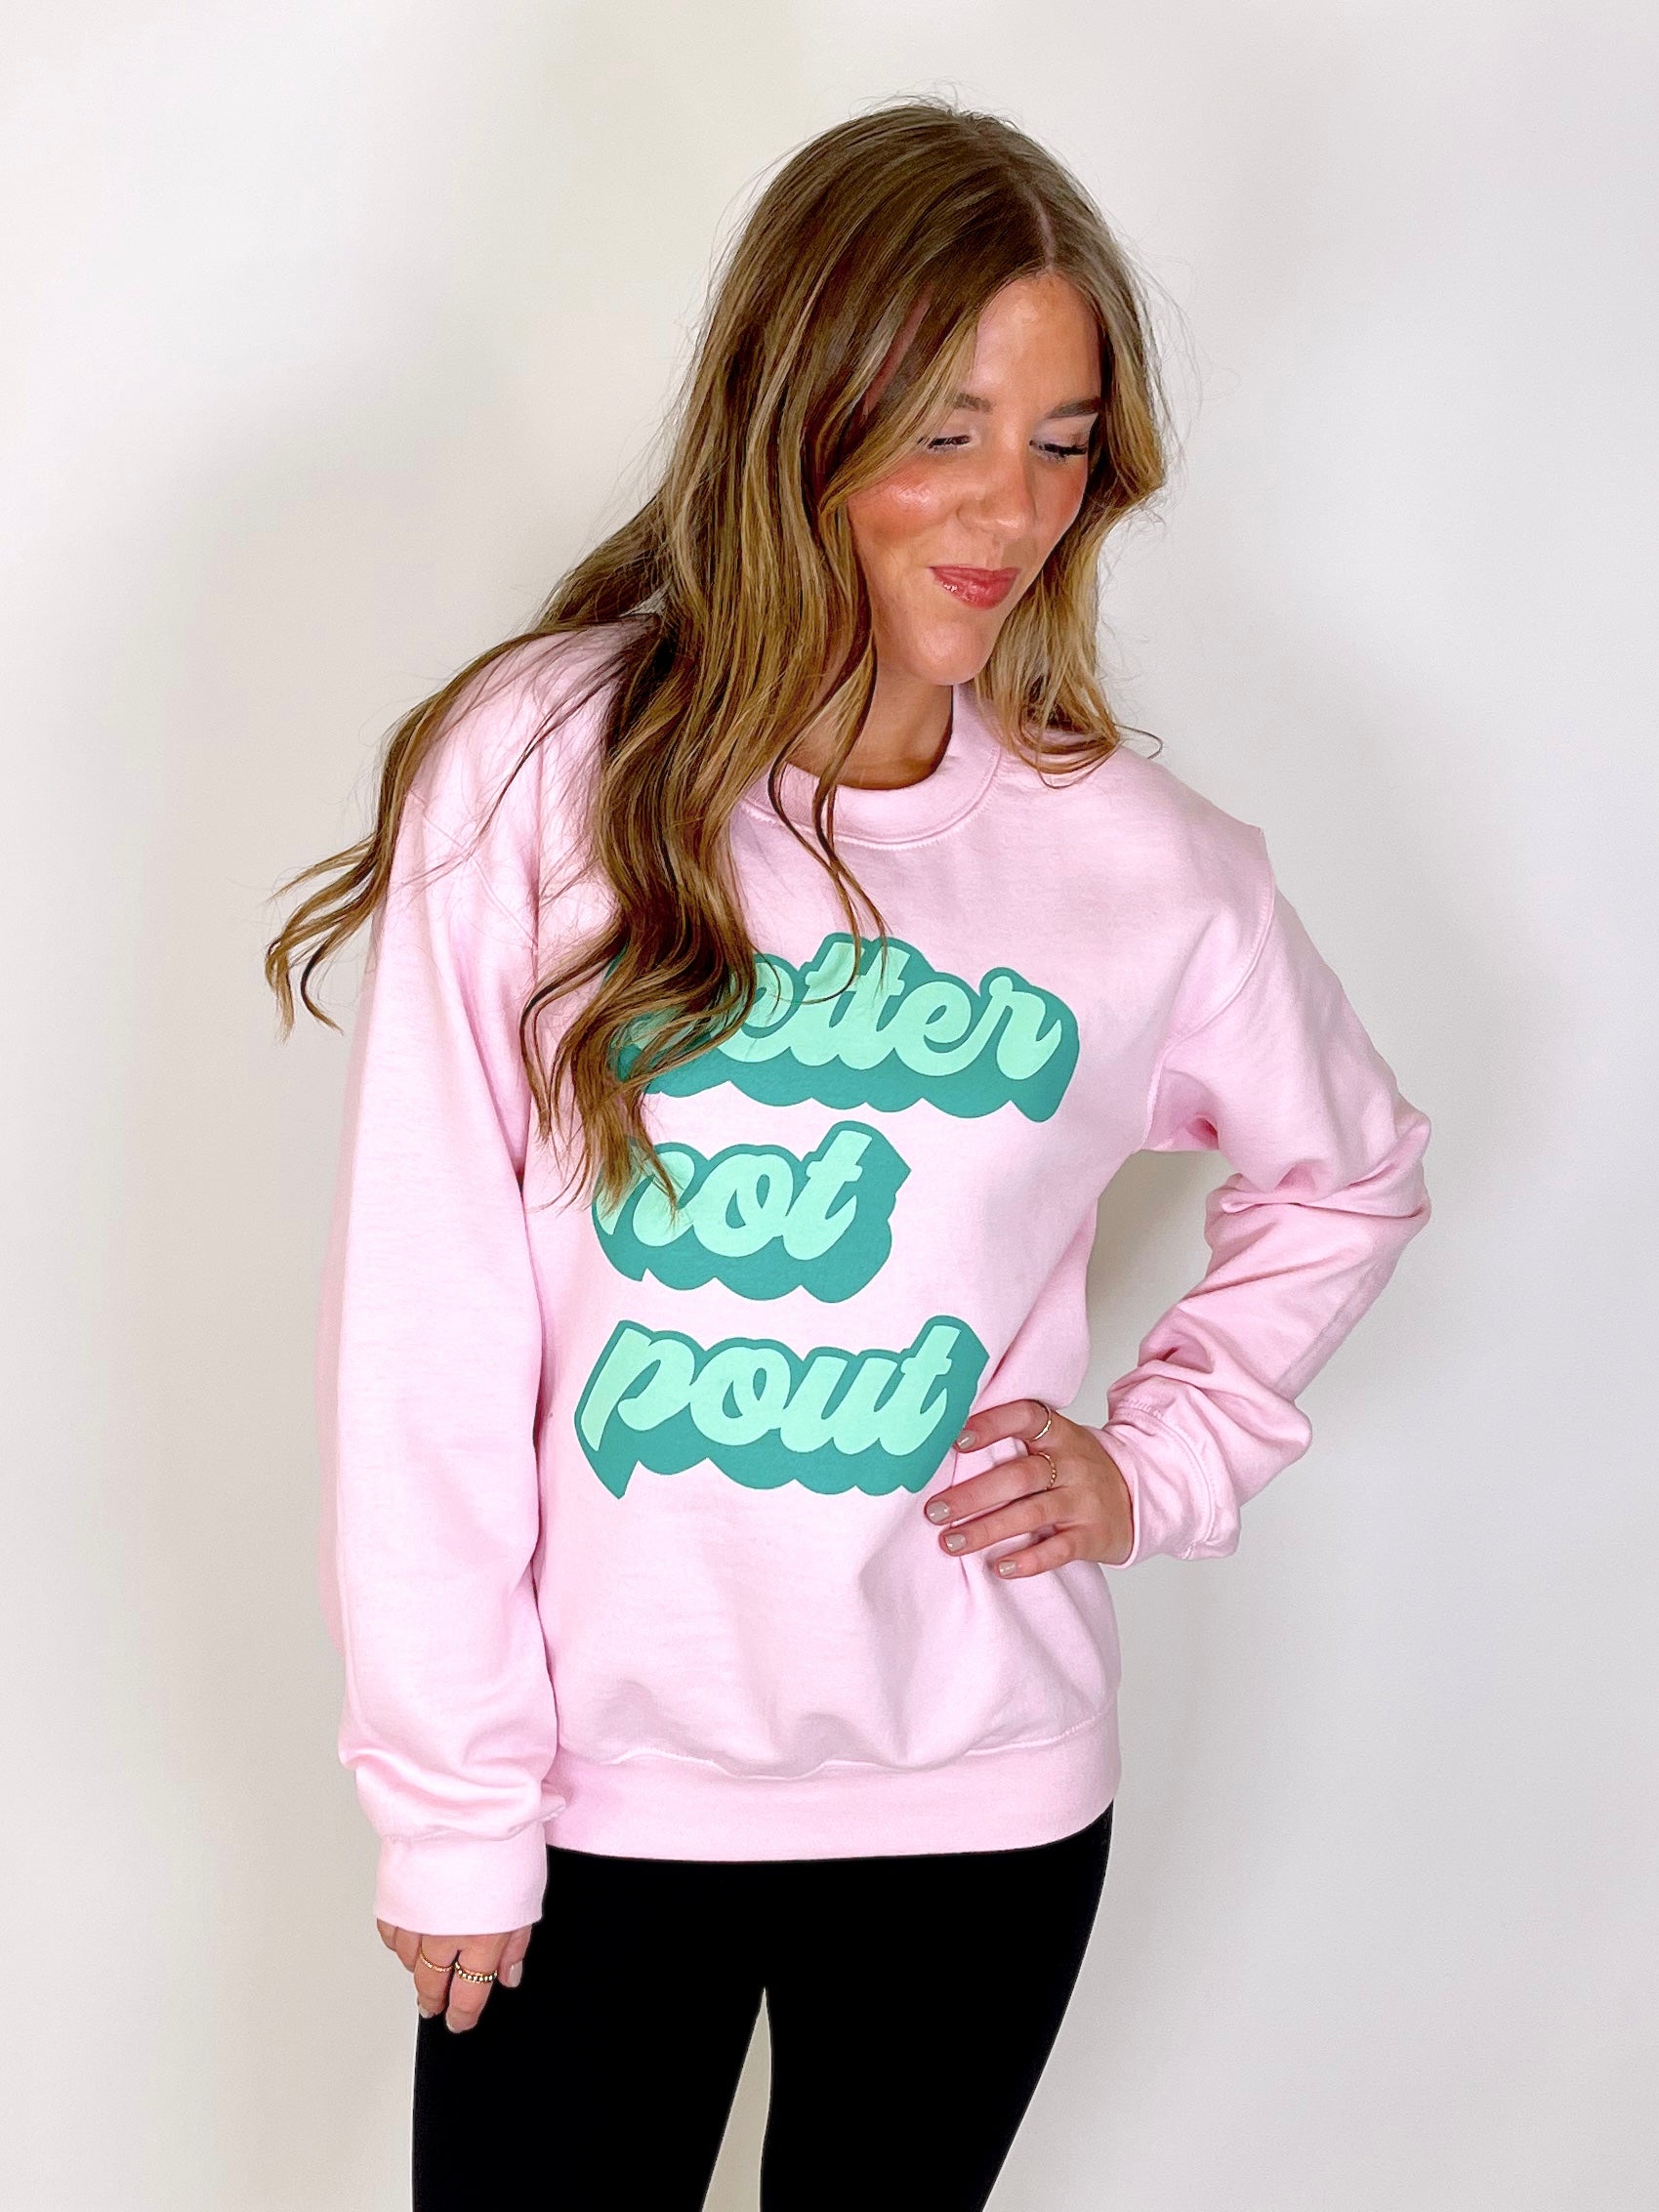 Naughty or Nice Sweatshirt | DOORBUSTER-Sweatshirt-Mugsby-The Village Shoppe, Women’s Fashion Boutique, Shop Online and In Store - Located in Muscle Shoals, AL.